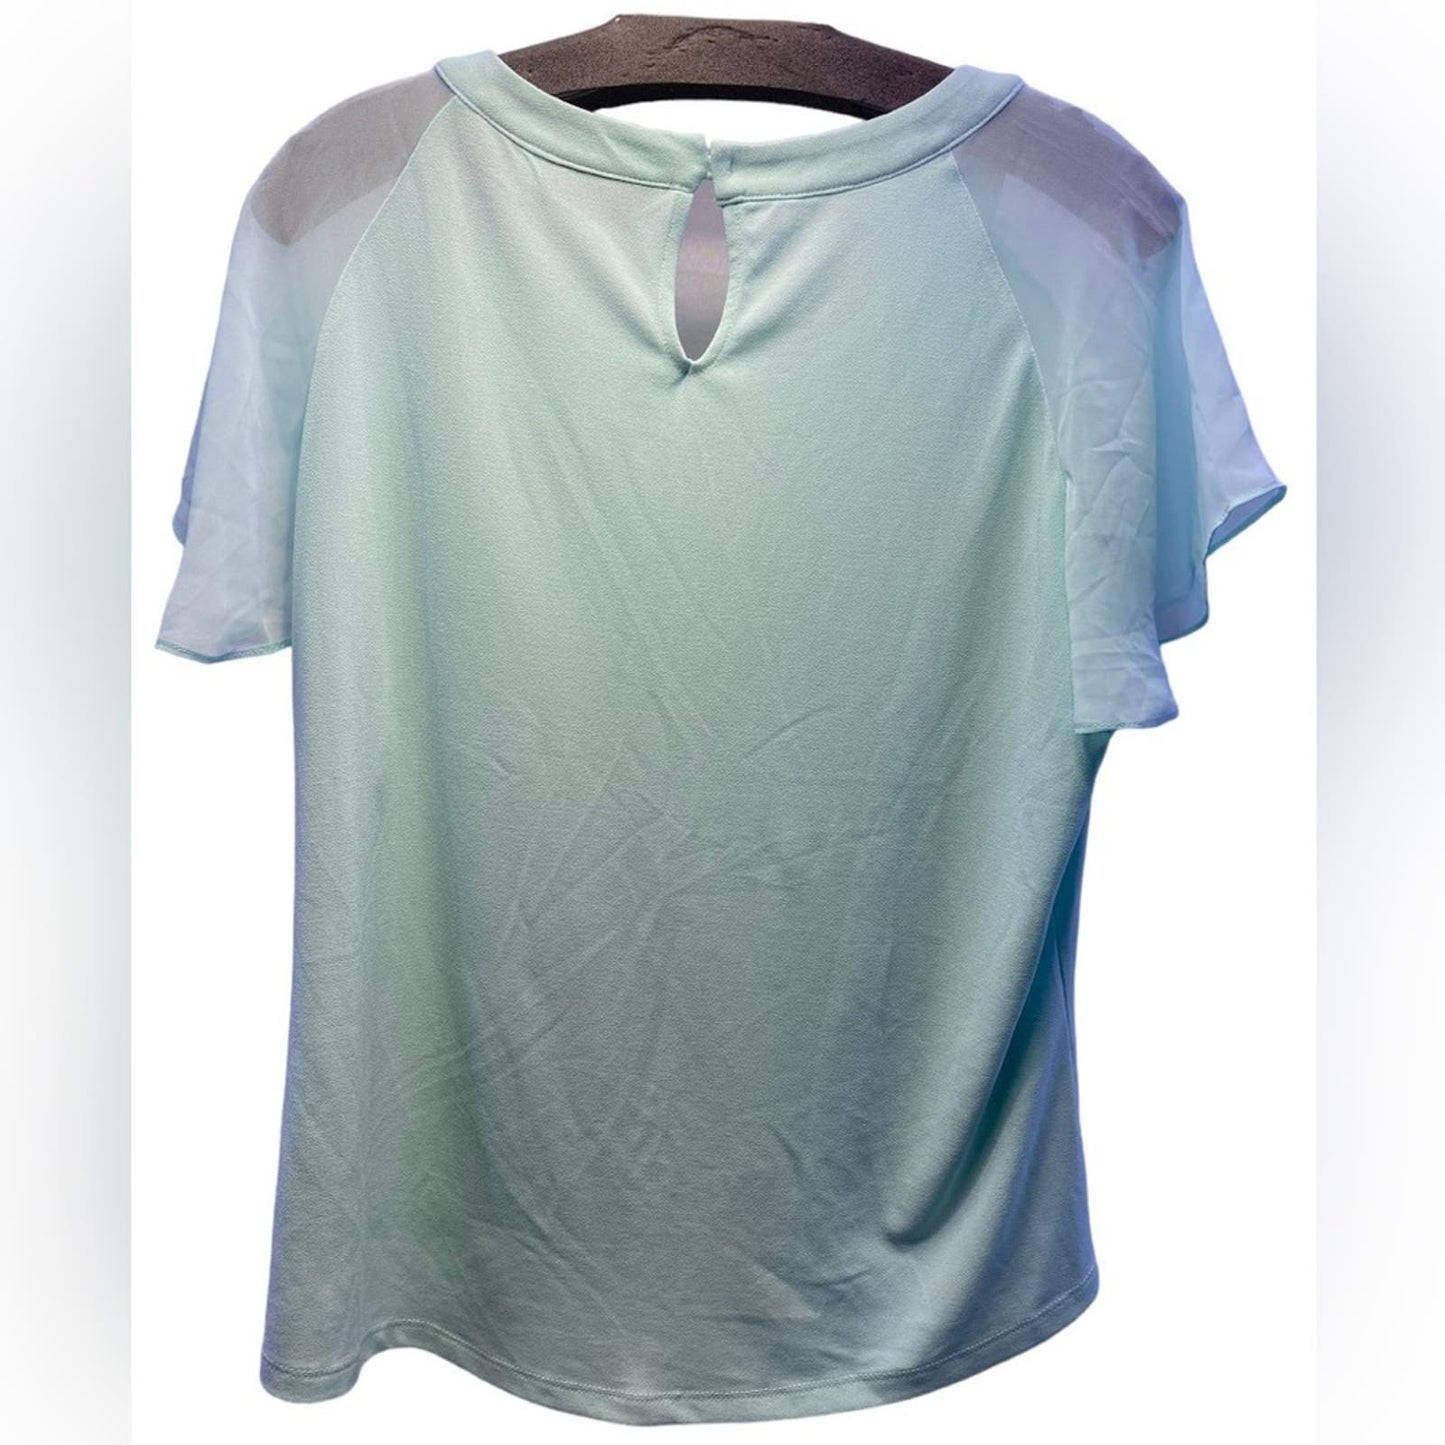 7th Avenue Mint Green Short Sleeve with Sheer Sleeves